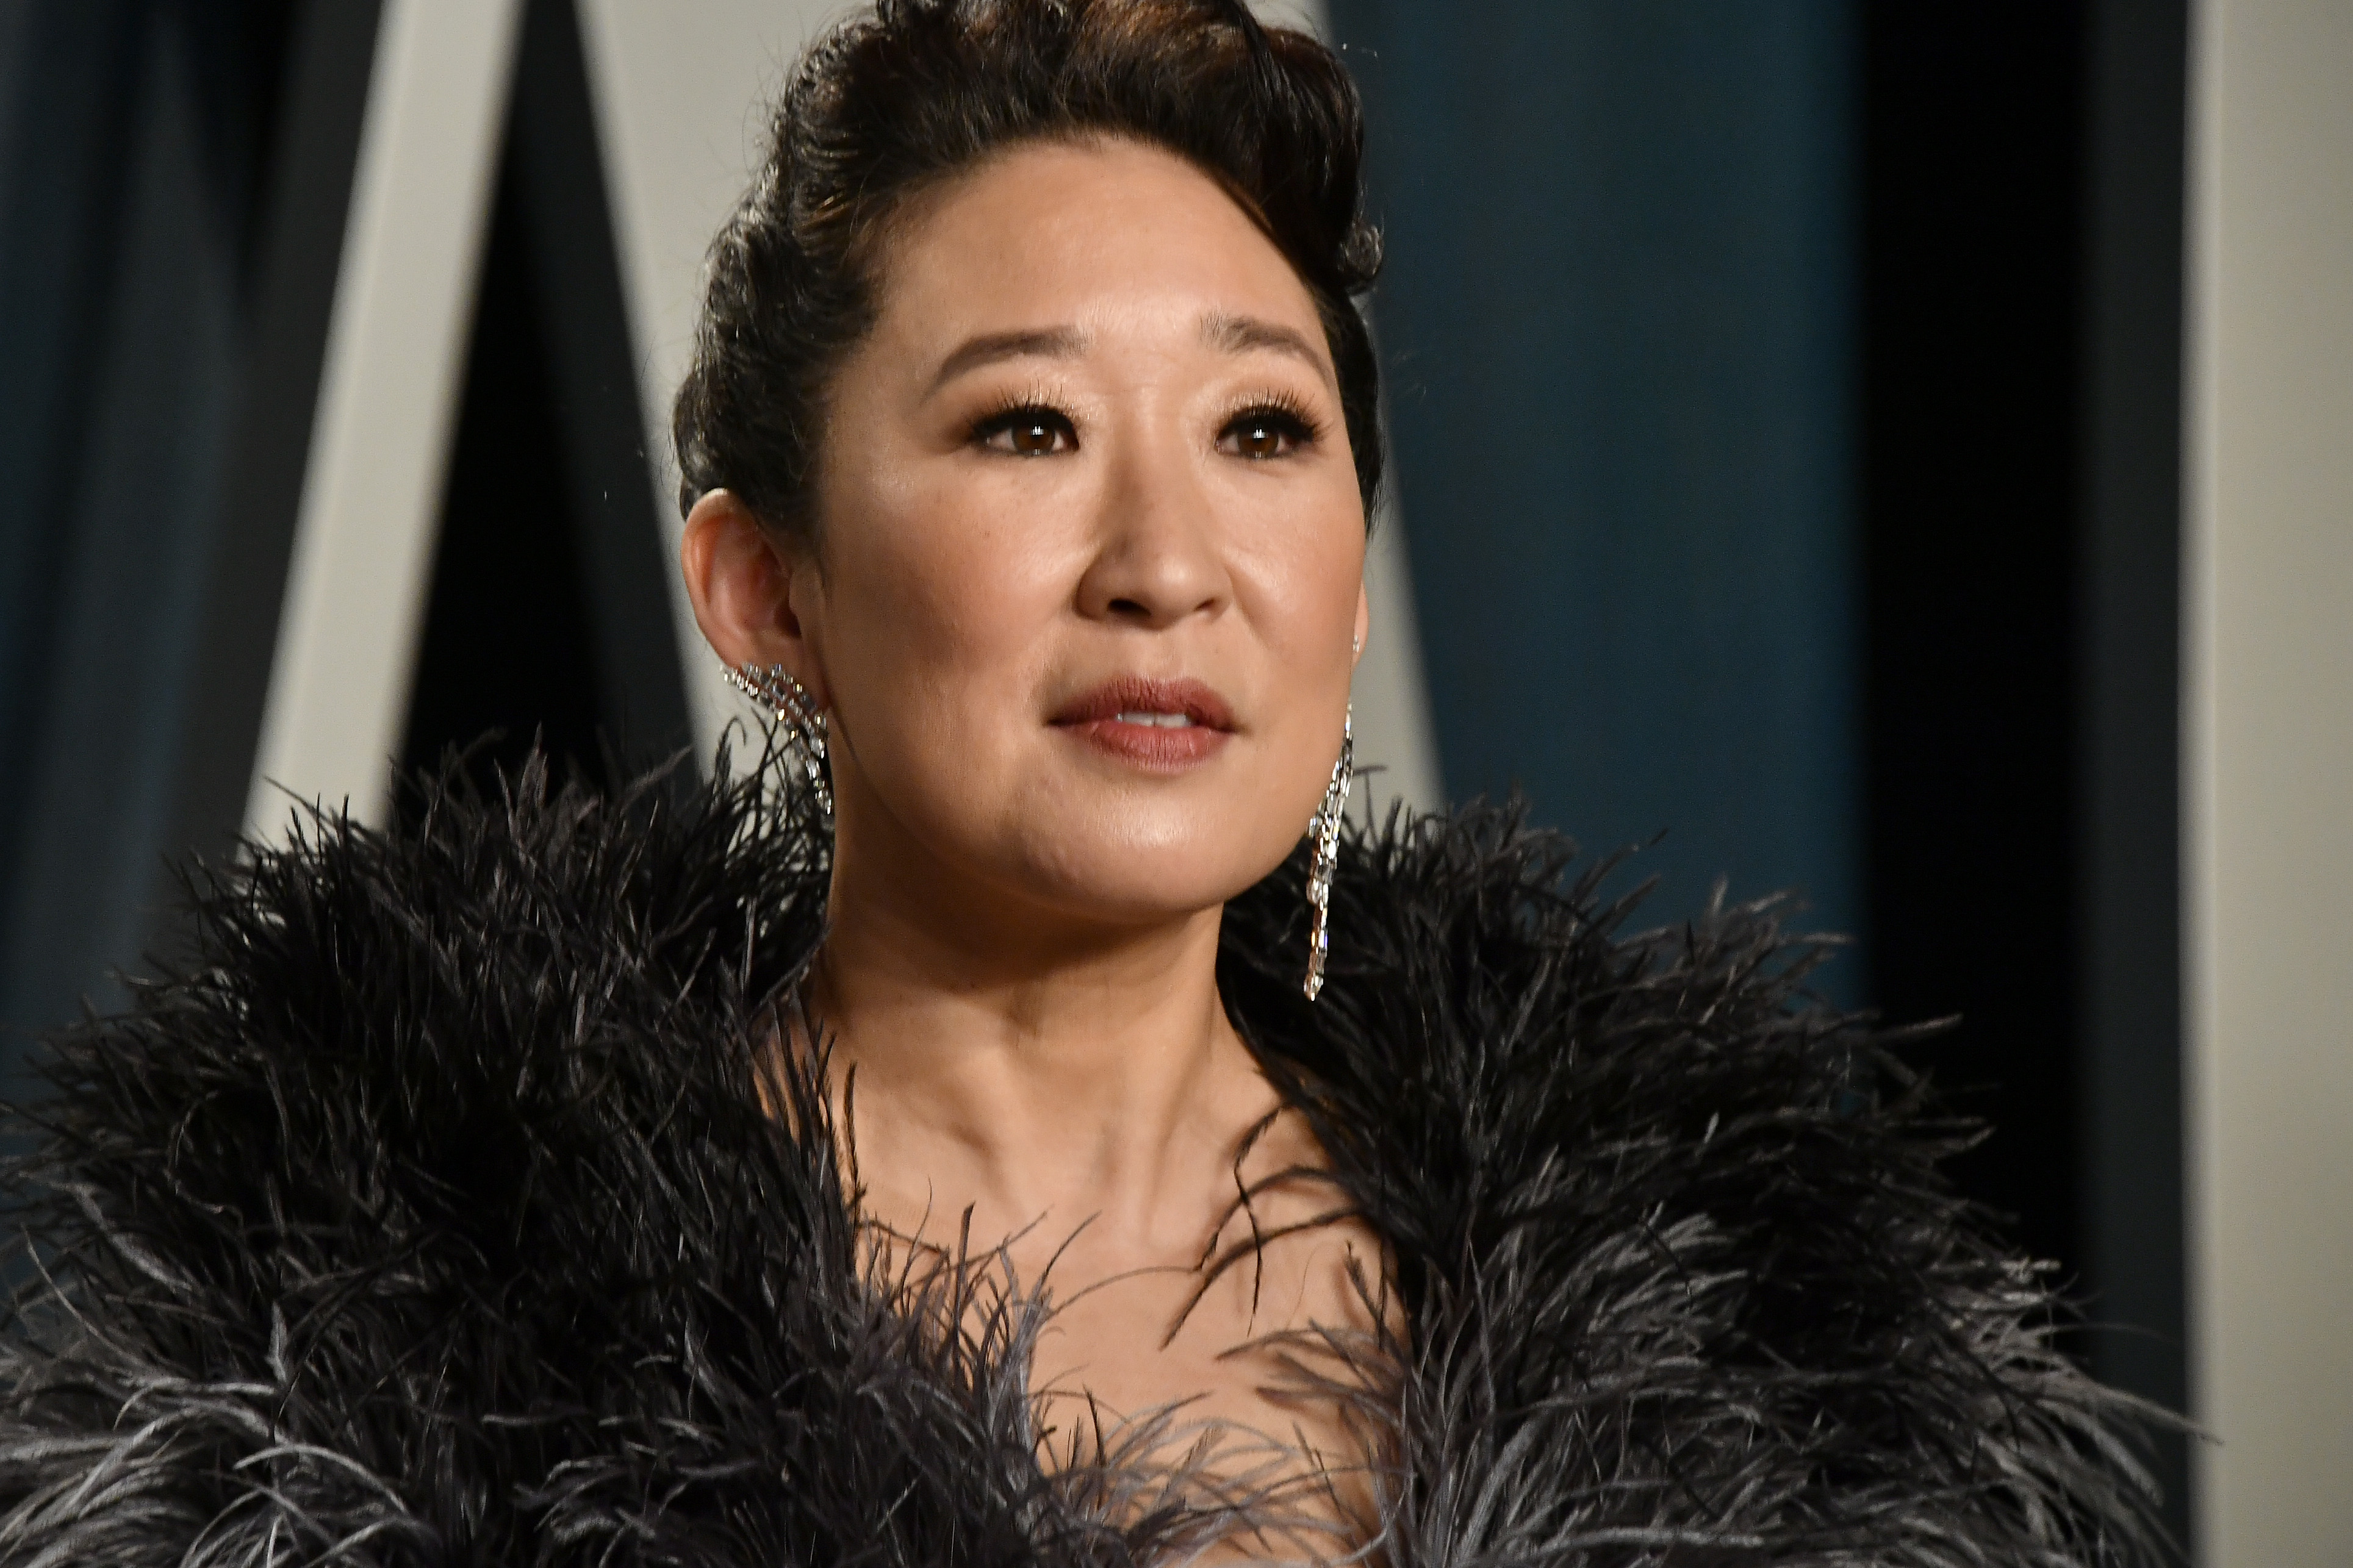 BEVERLY HILLS, CALIFORNIA - FEBRUARY 09: Sandra Oh attends the 2020 Vanity Fair Oscar Party hosted by Radhika Jones at Wallis Annenberg Center for the Performing Arts on February 09, 2020 in Beverly Hills, California.